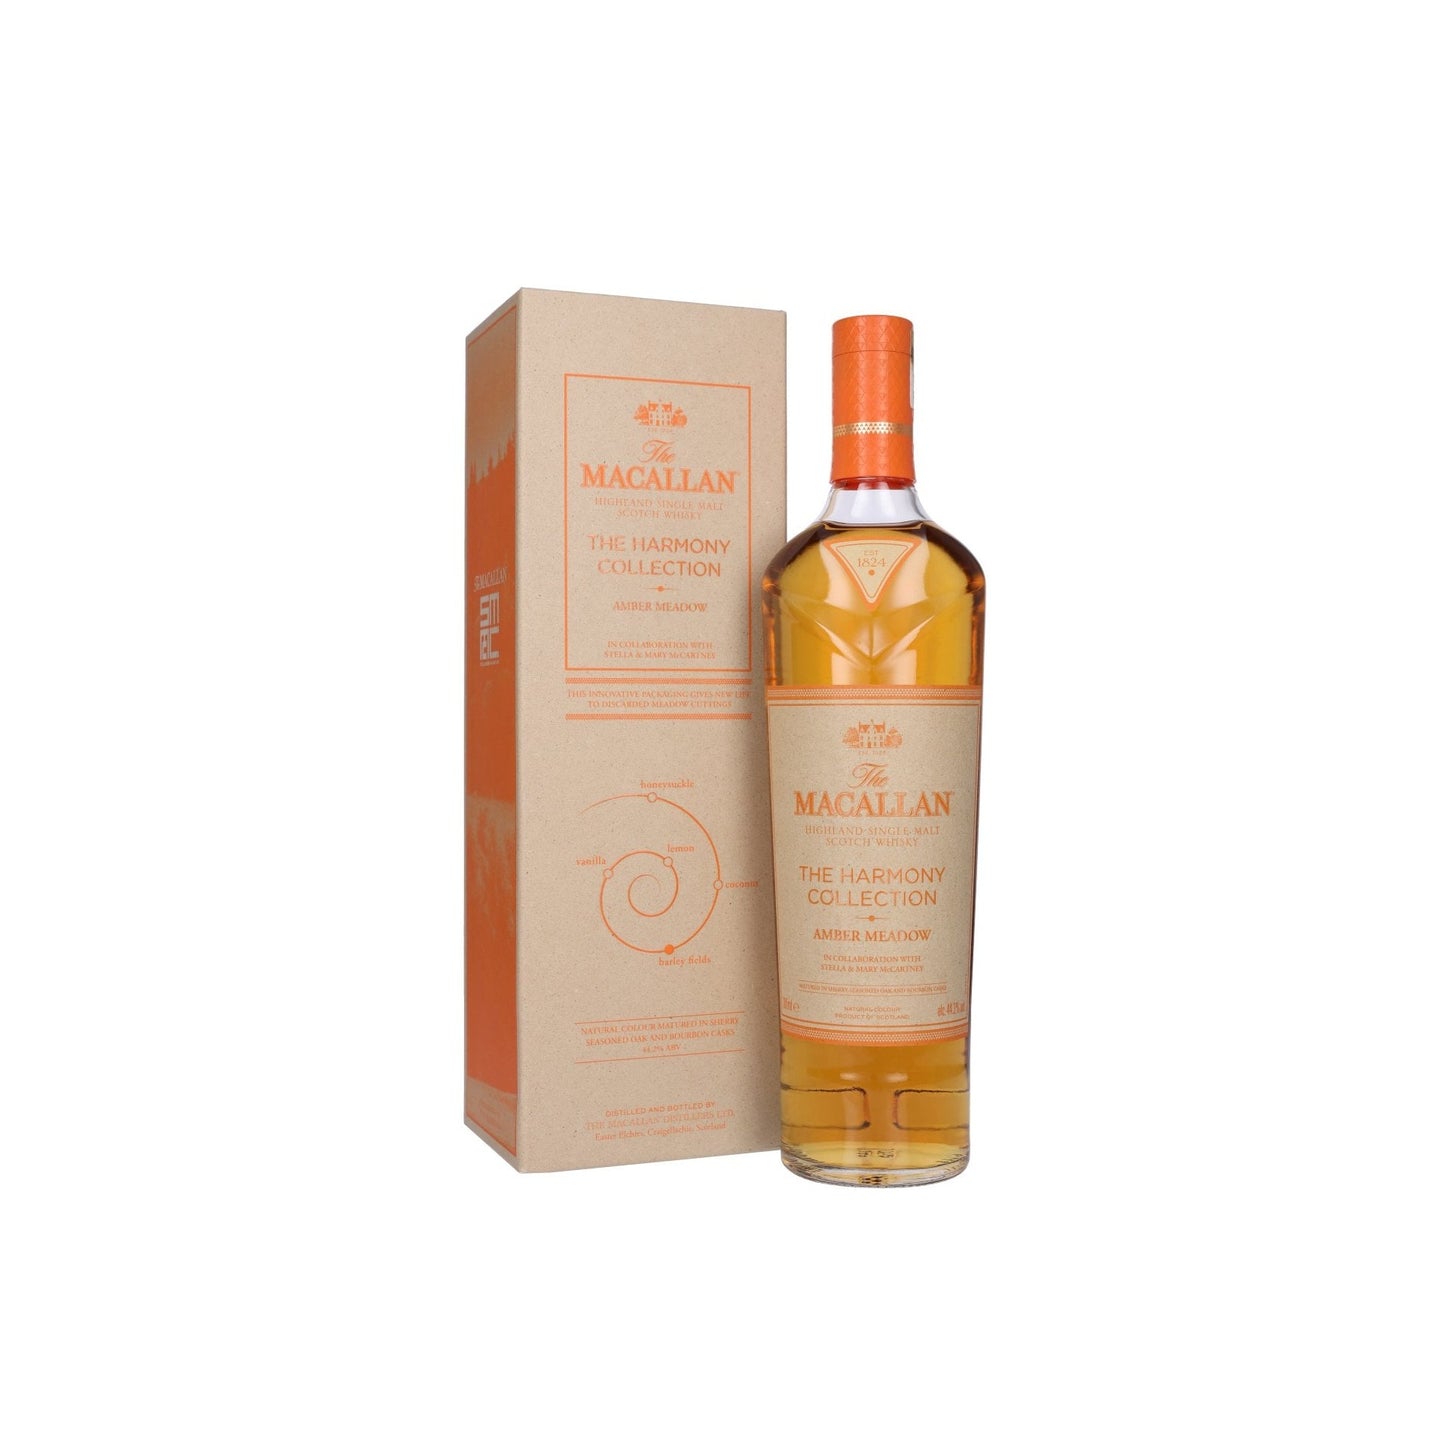 Macallan Harmony Collection Amber Meadow, 750 ML